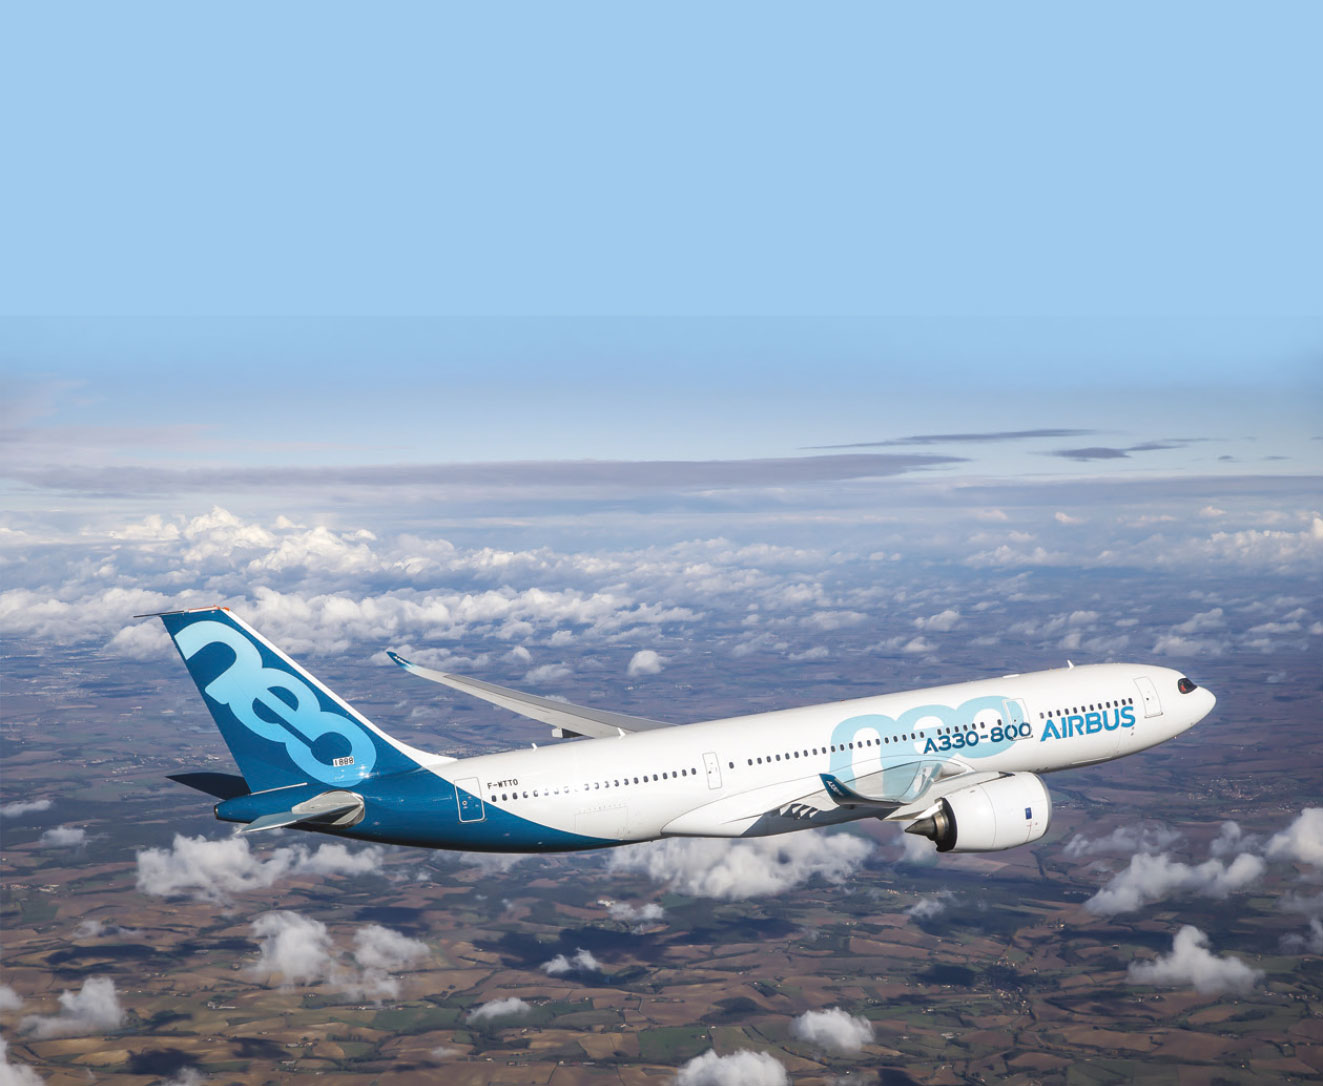 A330-800 Receives Joint EASA and FAA Type Certification